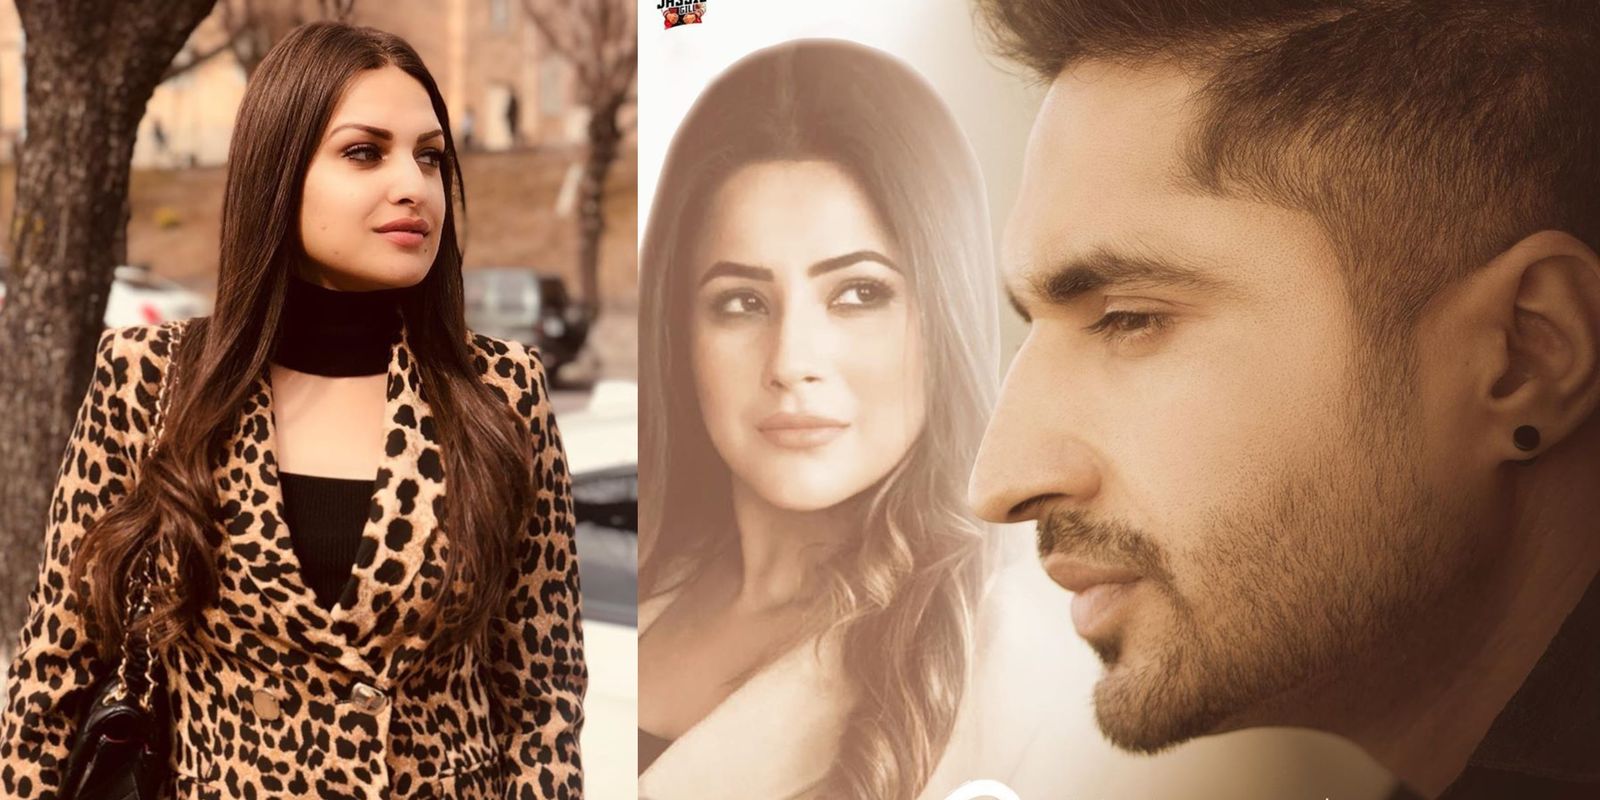 Himanshi Khurana Unfollowed Jassie Gill Because He’s Collaborating With Shehnaaz? Former Finally Breaks Silence